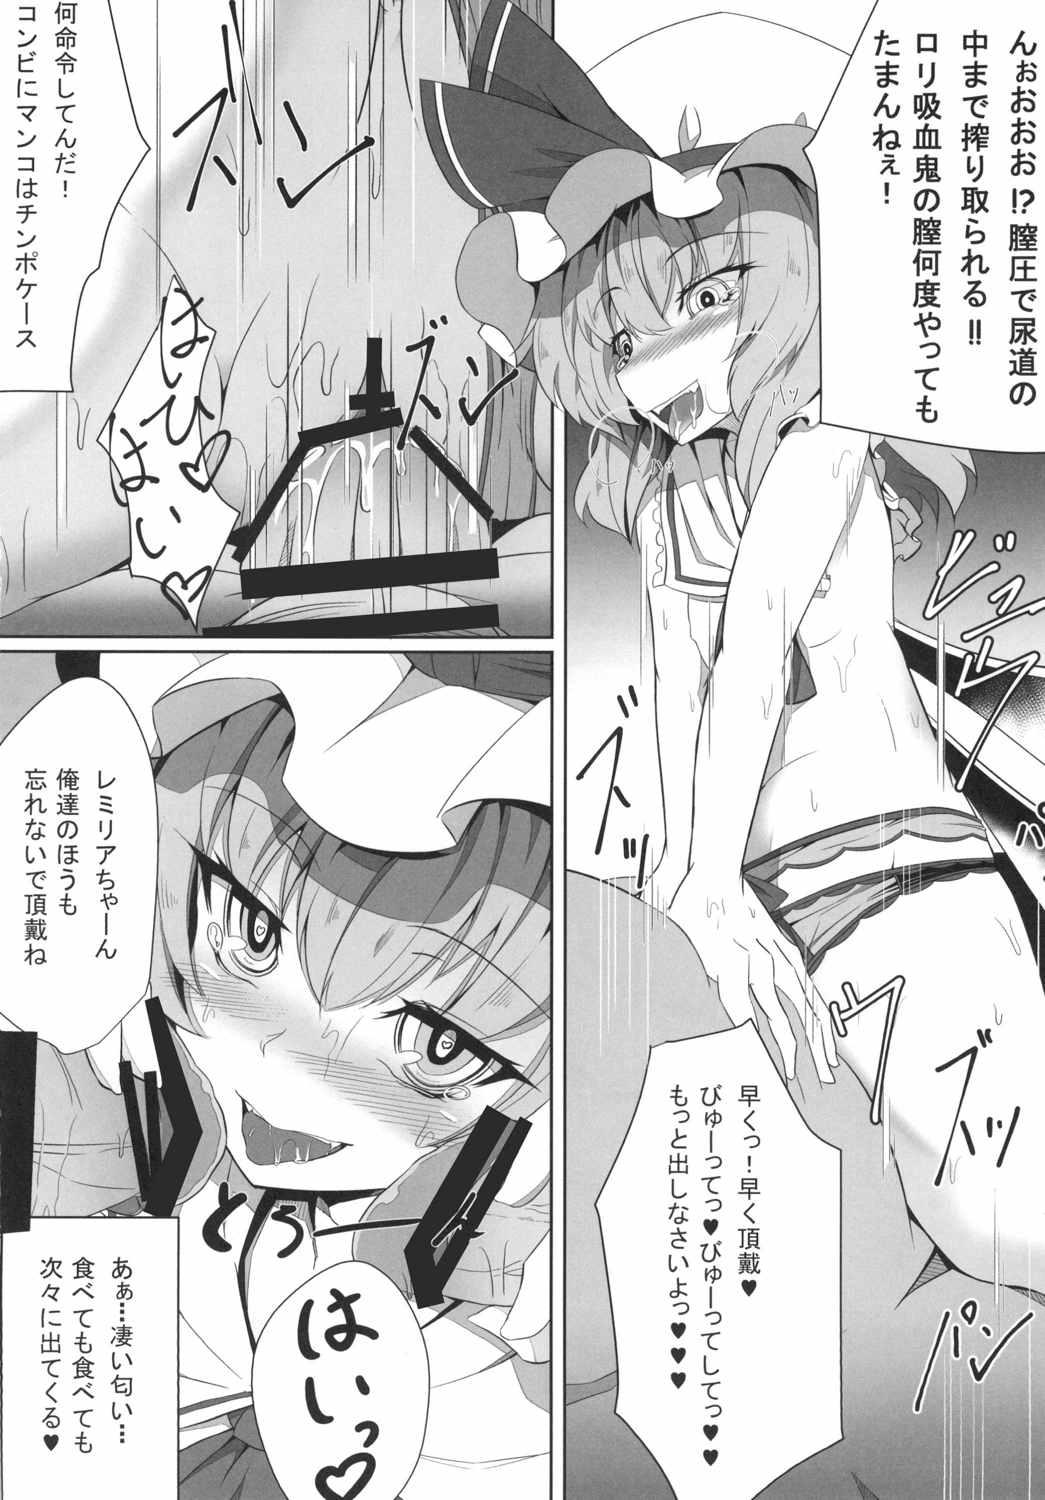 Culos M.P. Vol. 4 - Touhou project Stepfather - Page 7